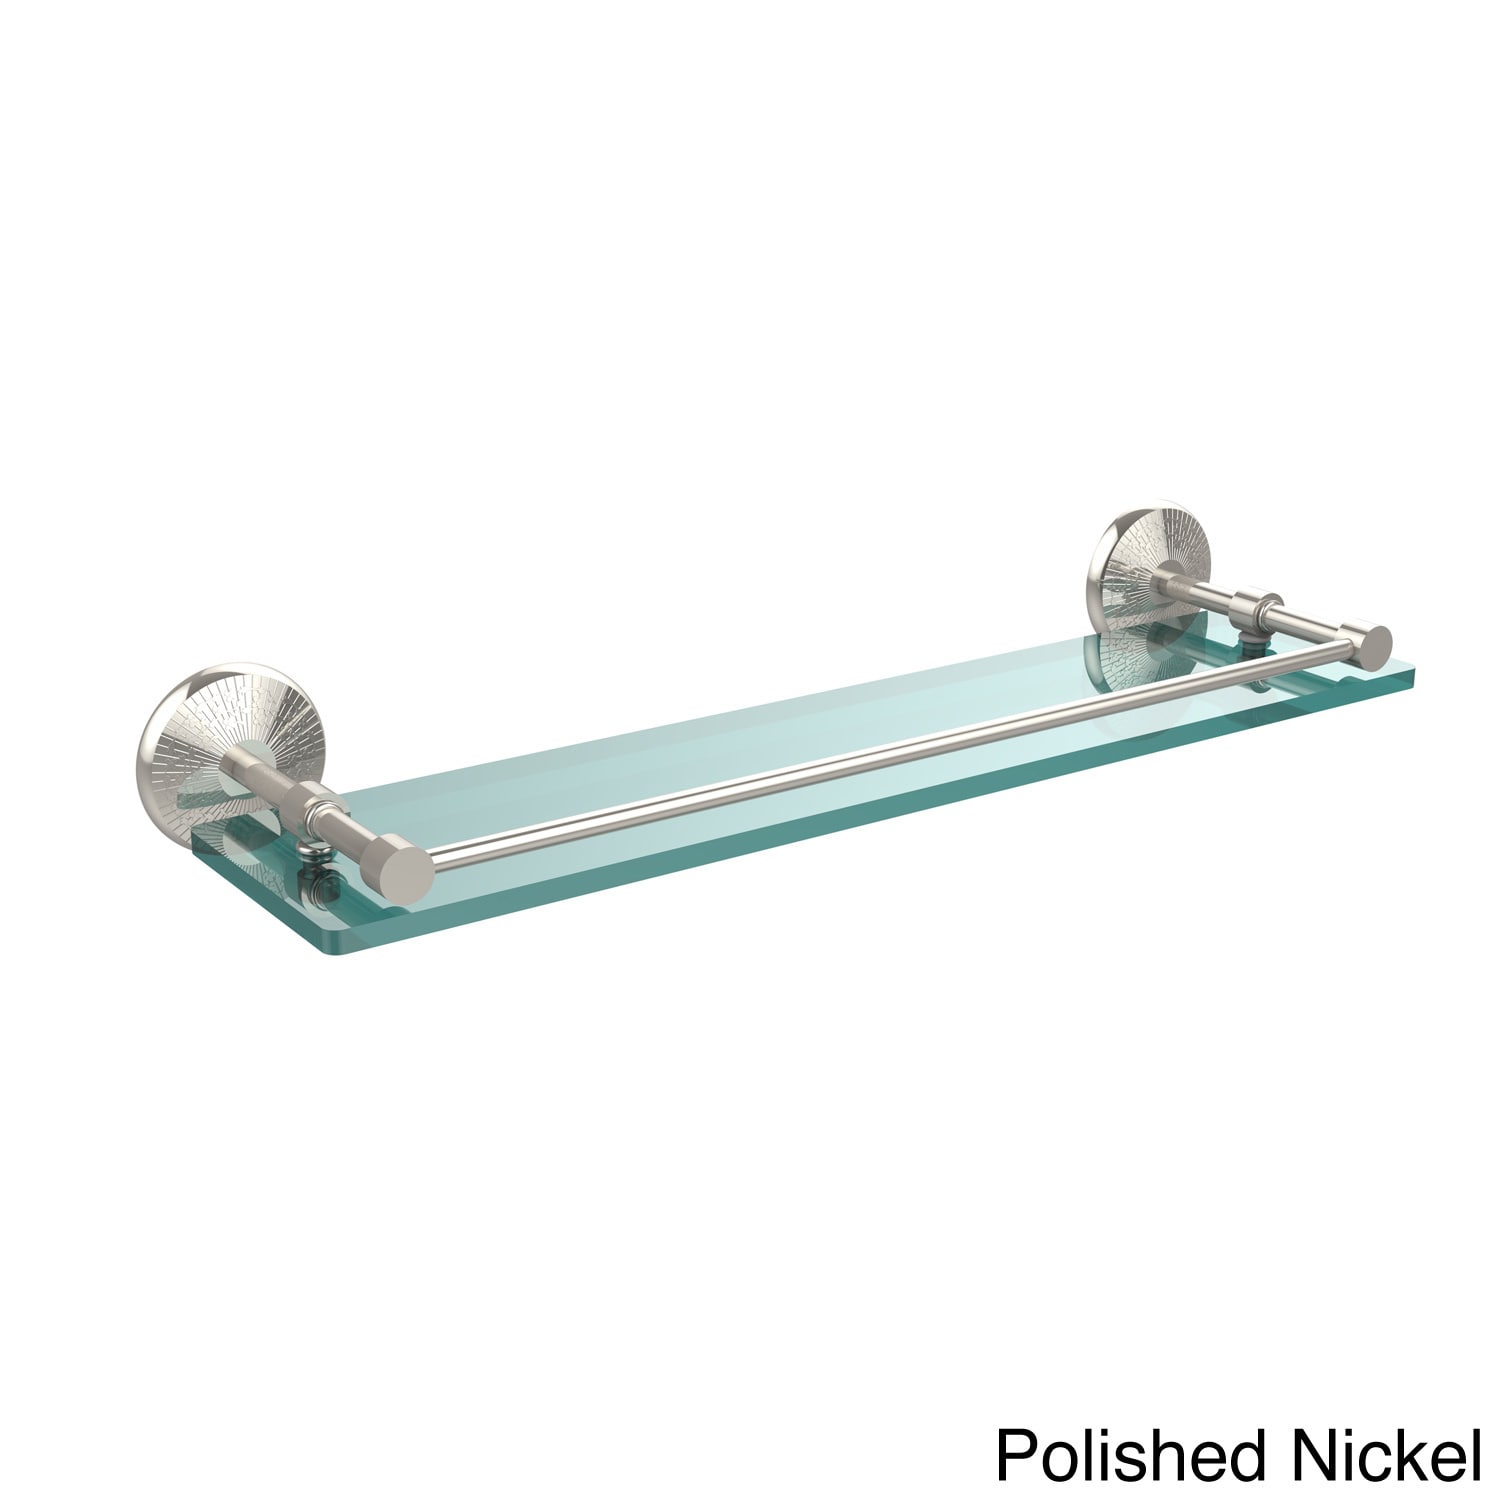 Monte Carlo Collection Tempered Glass Shelf with Gallery Rail - Satin Nickel / 22 Inch - image 5 of 5